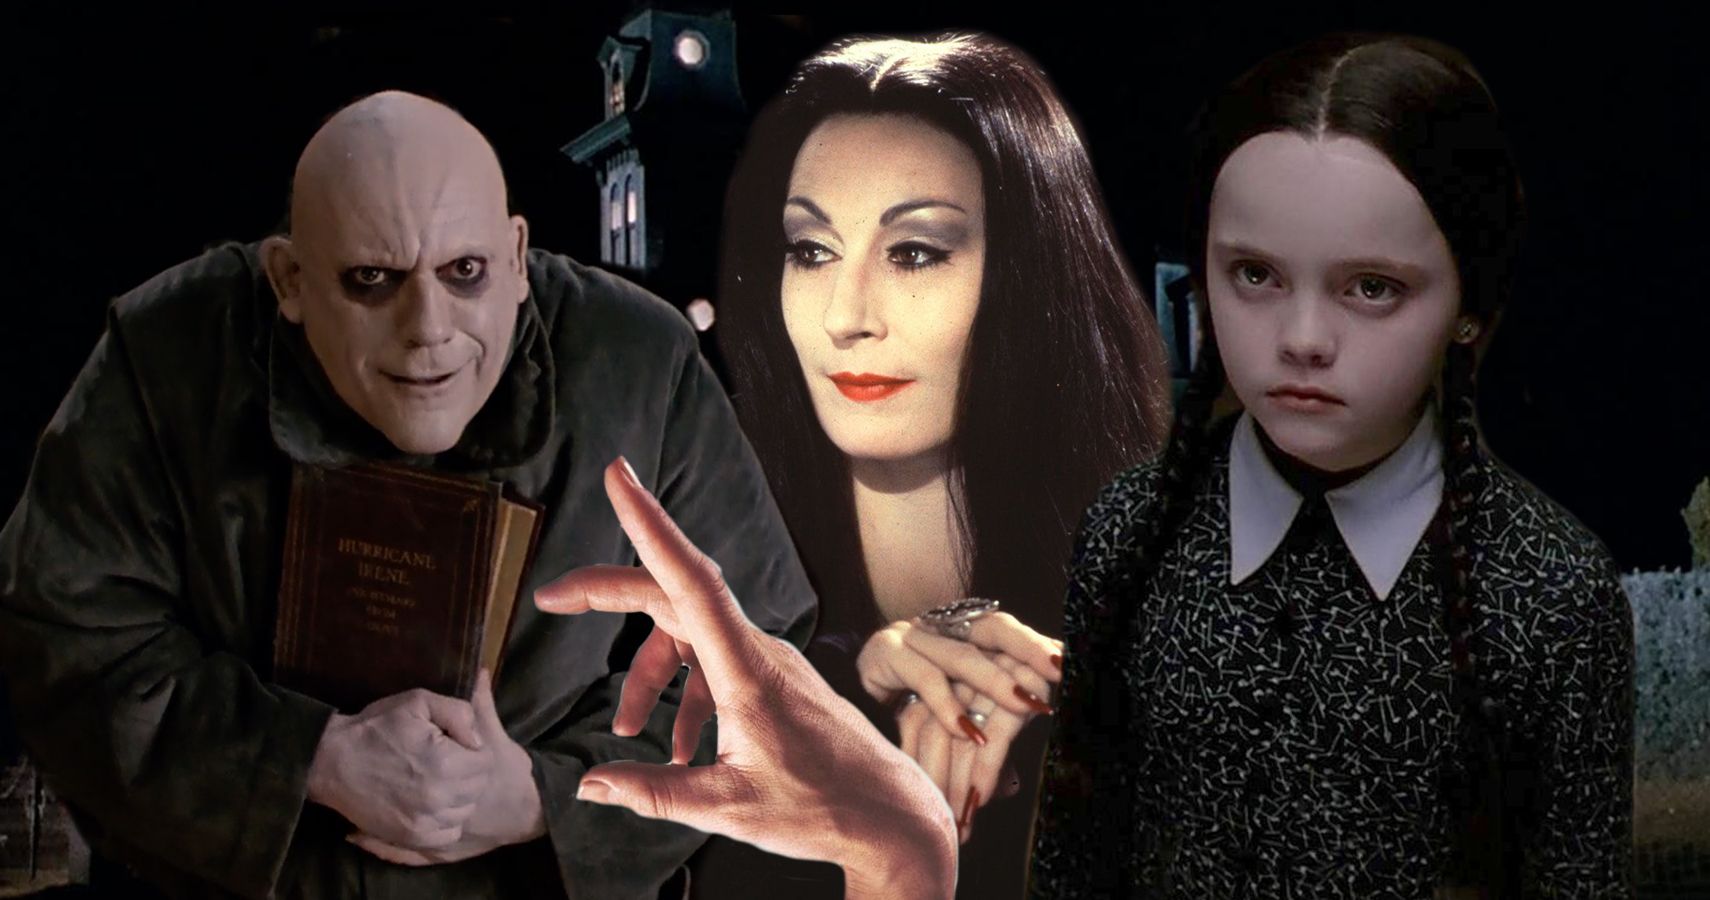 The Addams Family: 10 Questions We Have About The Family & Films